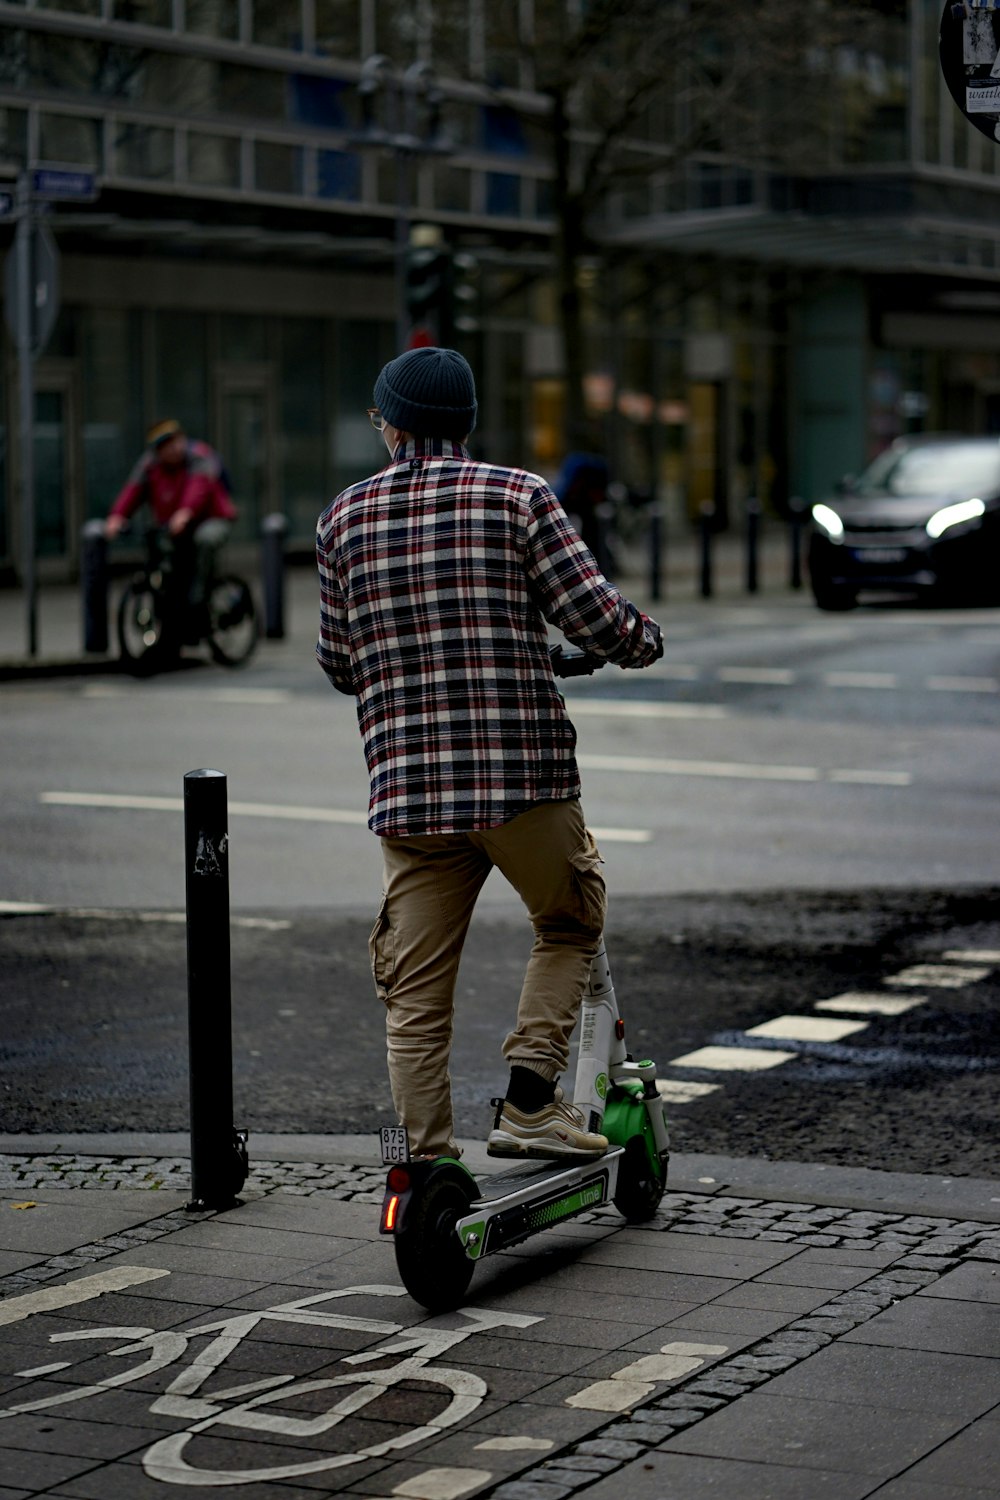 man in red and white plaid dress shirt and brown pants riding green and black skateboard